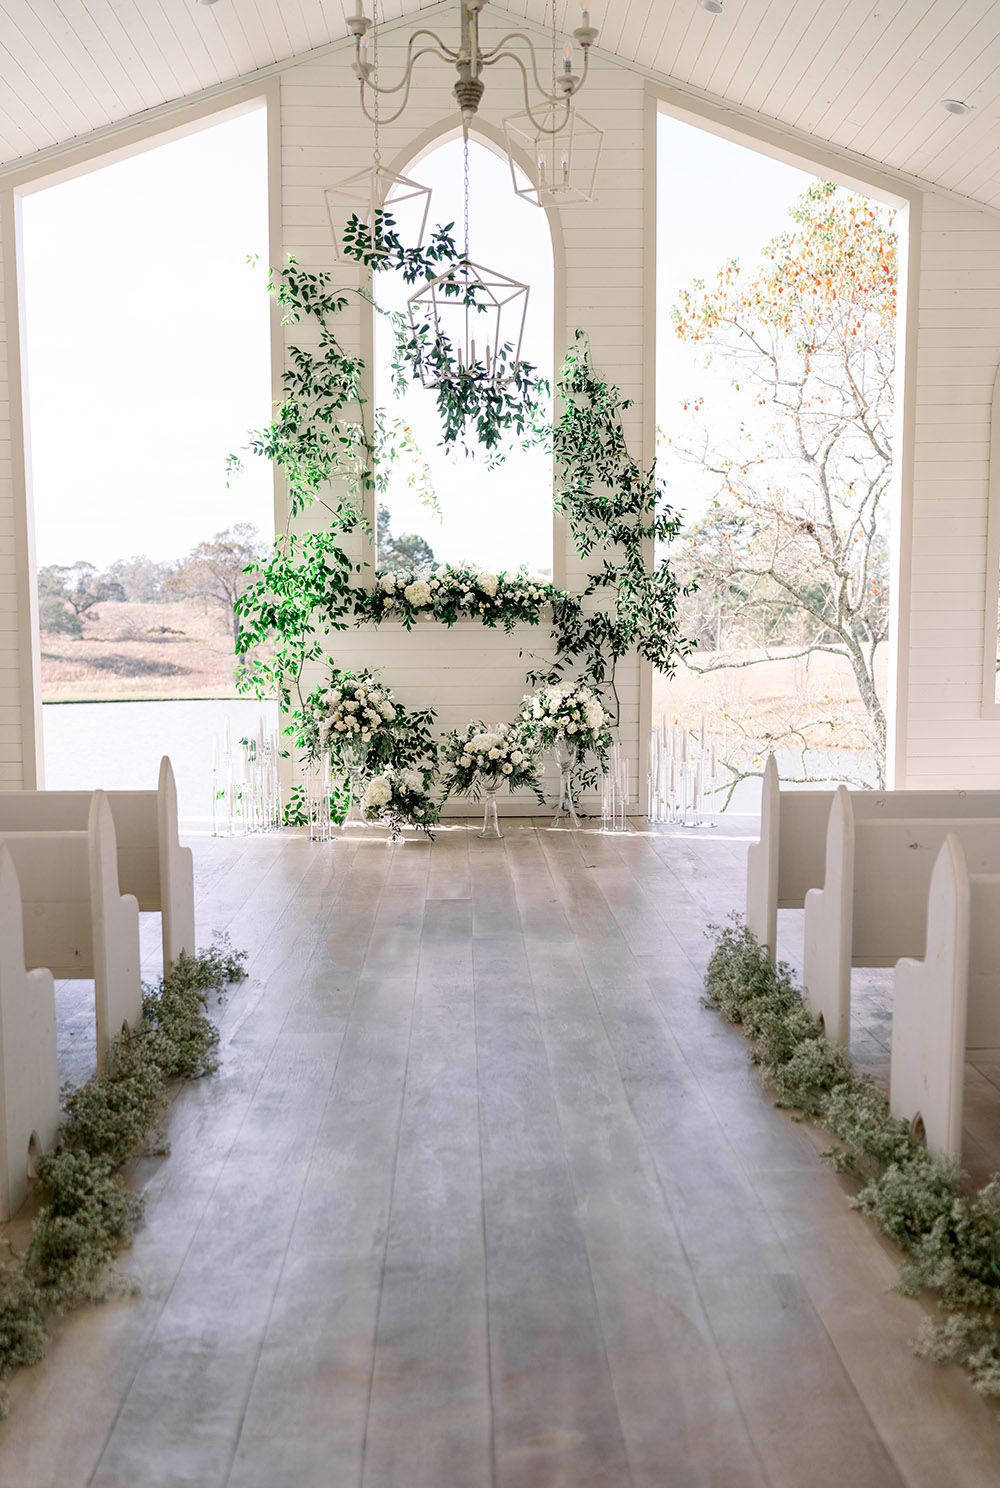 The White Magnolia Chapel decorated in greenery and baby's breath